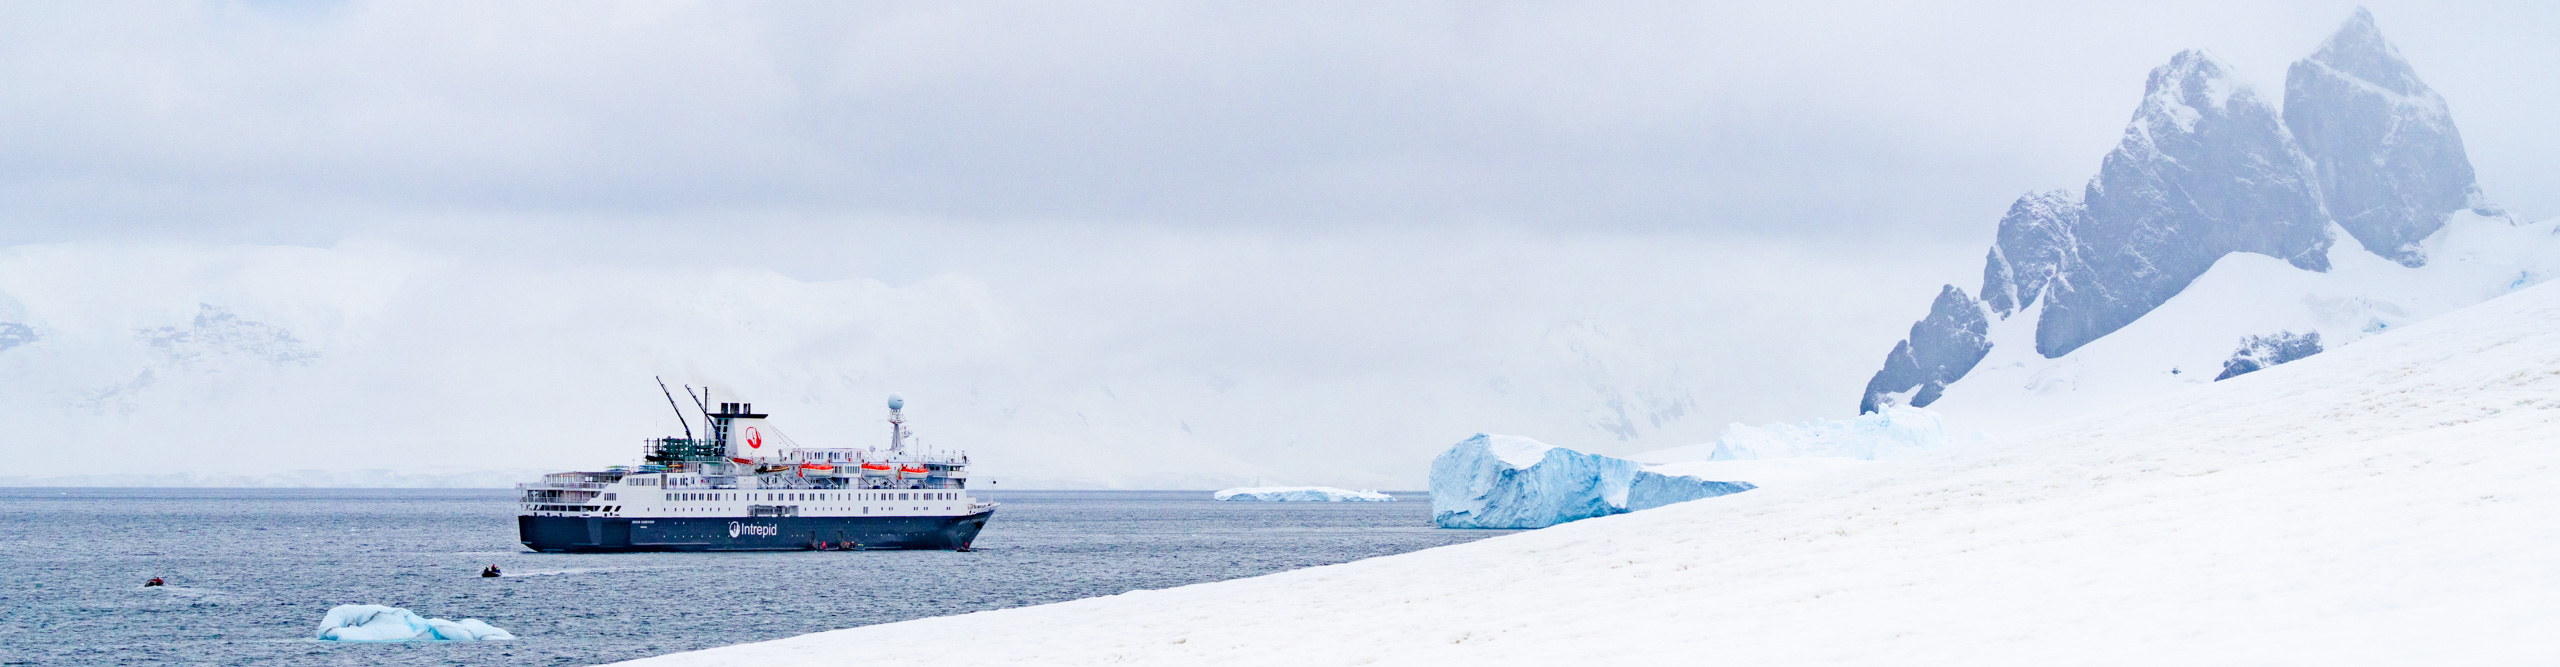 Cruise boat in the  water near Elephant Island, in the Antarctic circle, on an overcast day 